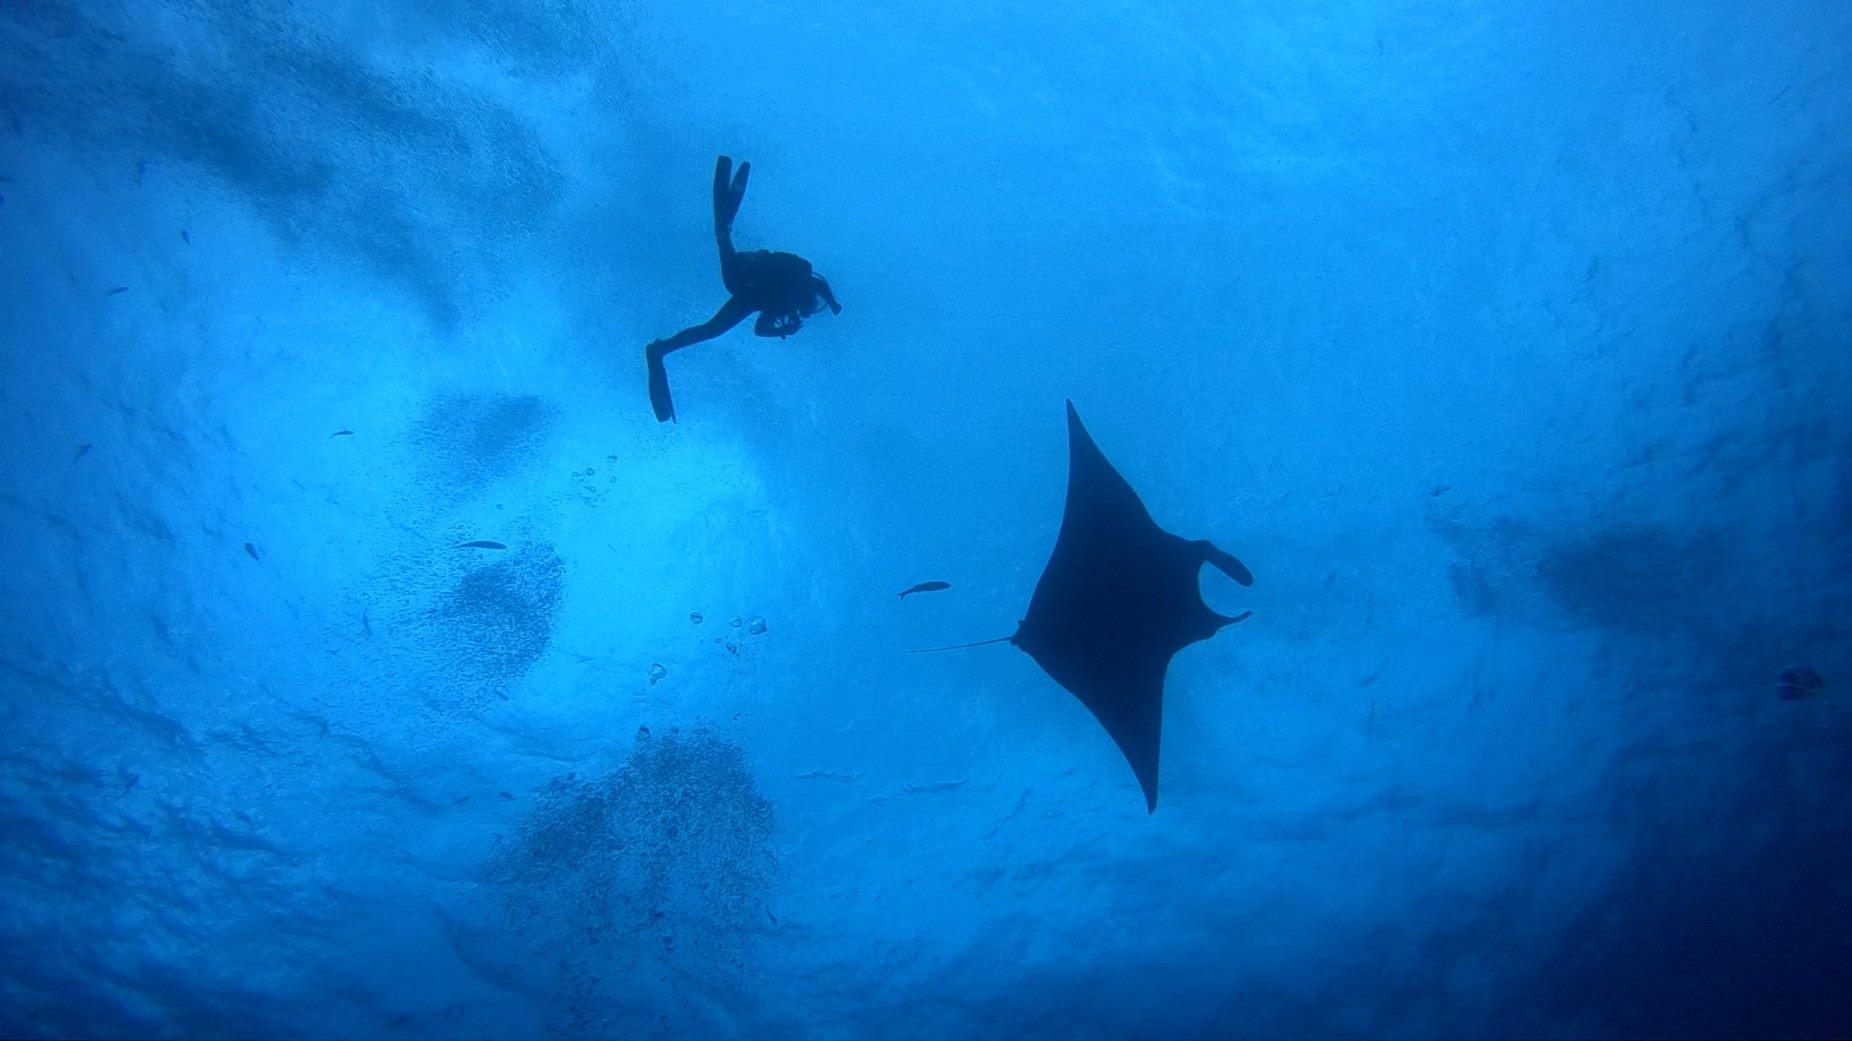 Maya offers a new perspective in Manta Love at Roca Partida